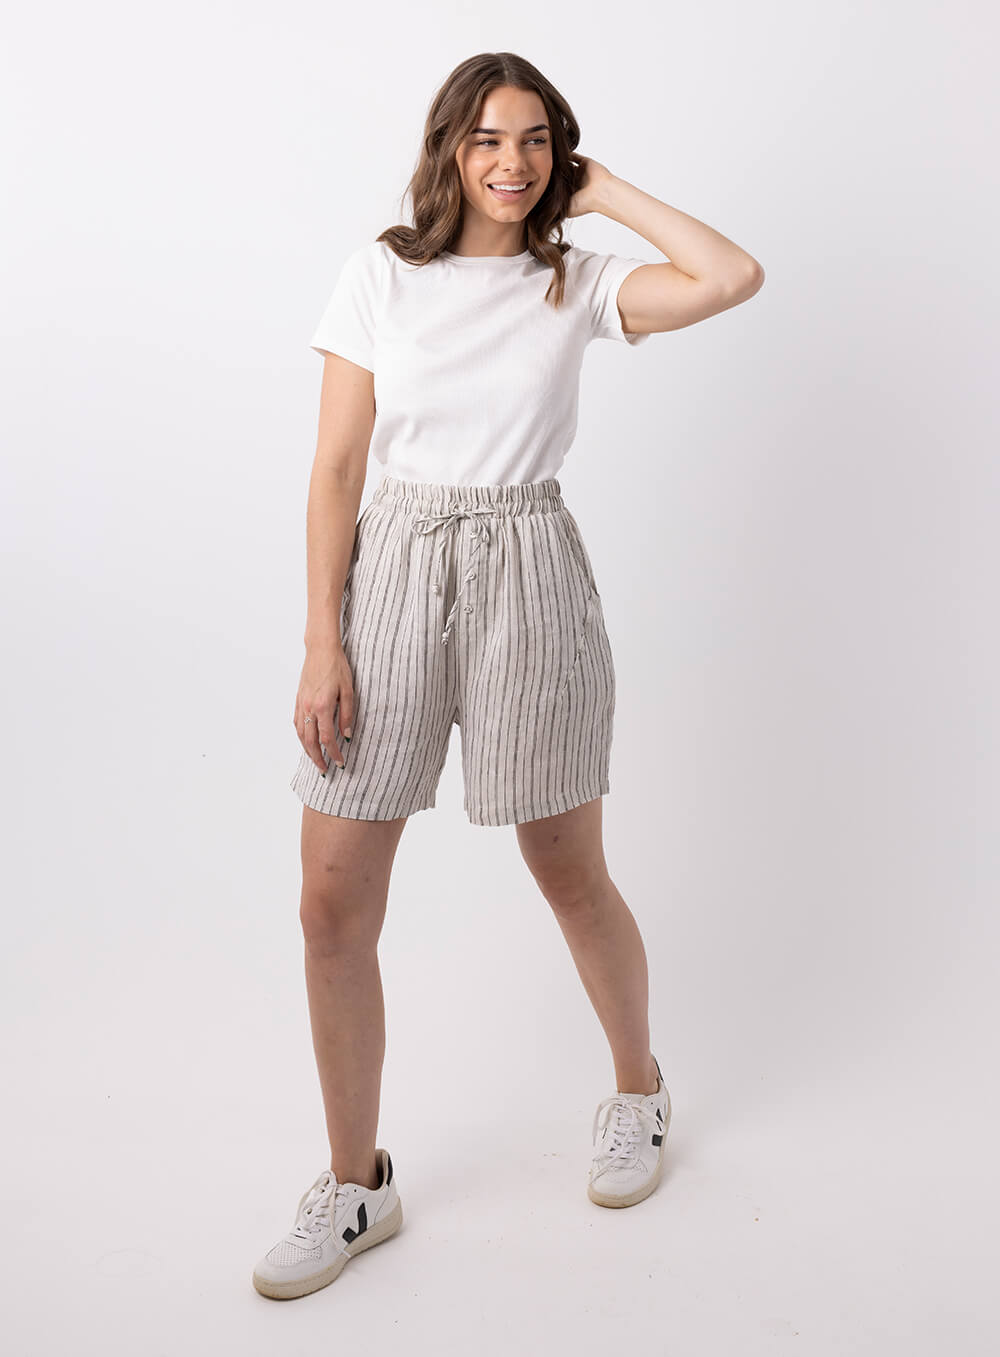 The Evan stripe linen shorts in beige colour with black thin stripes is made in 100% linen, features 2 side pockets and 2 back pockets, has wide elastic waistband with tie, 3 mock buttons and finish mid thigh length.